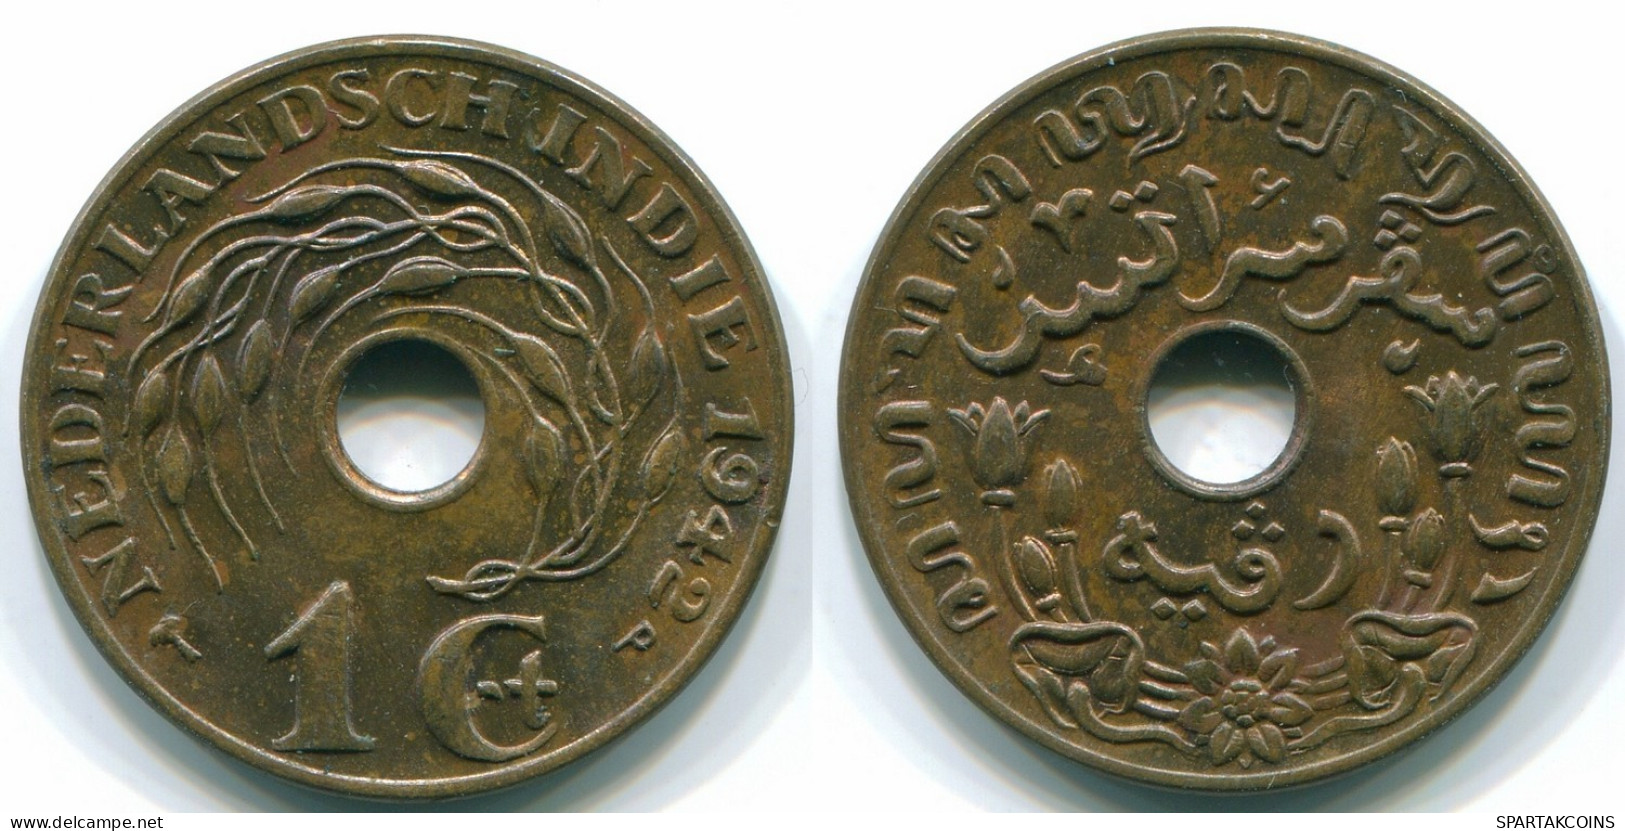 1 CENT 1942 NETHERLANDS EAST INDIES INDONESIA Bronze Colonial Coin #S10314.U.A - Indes Neerlandesas